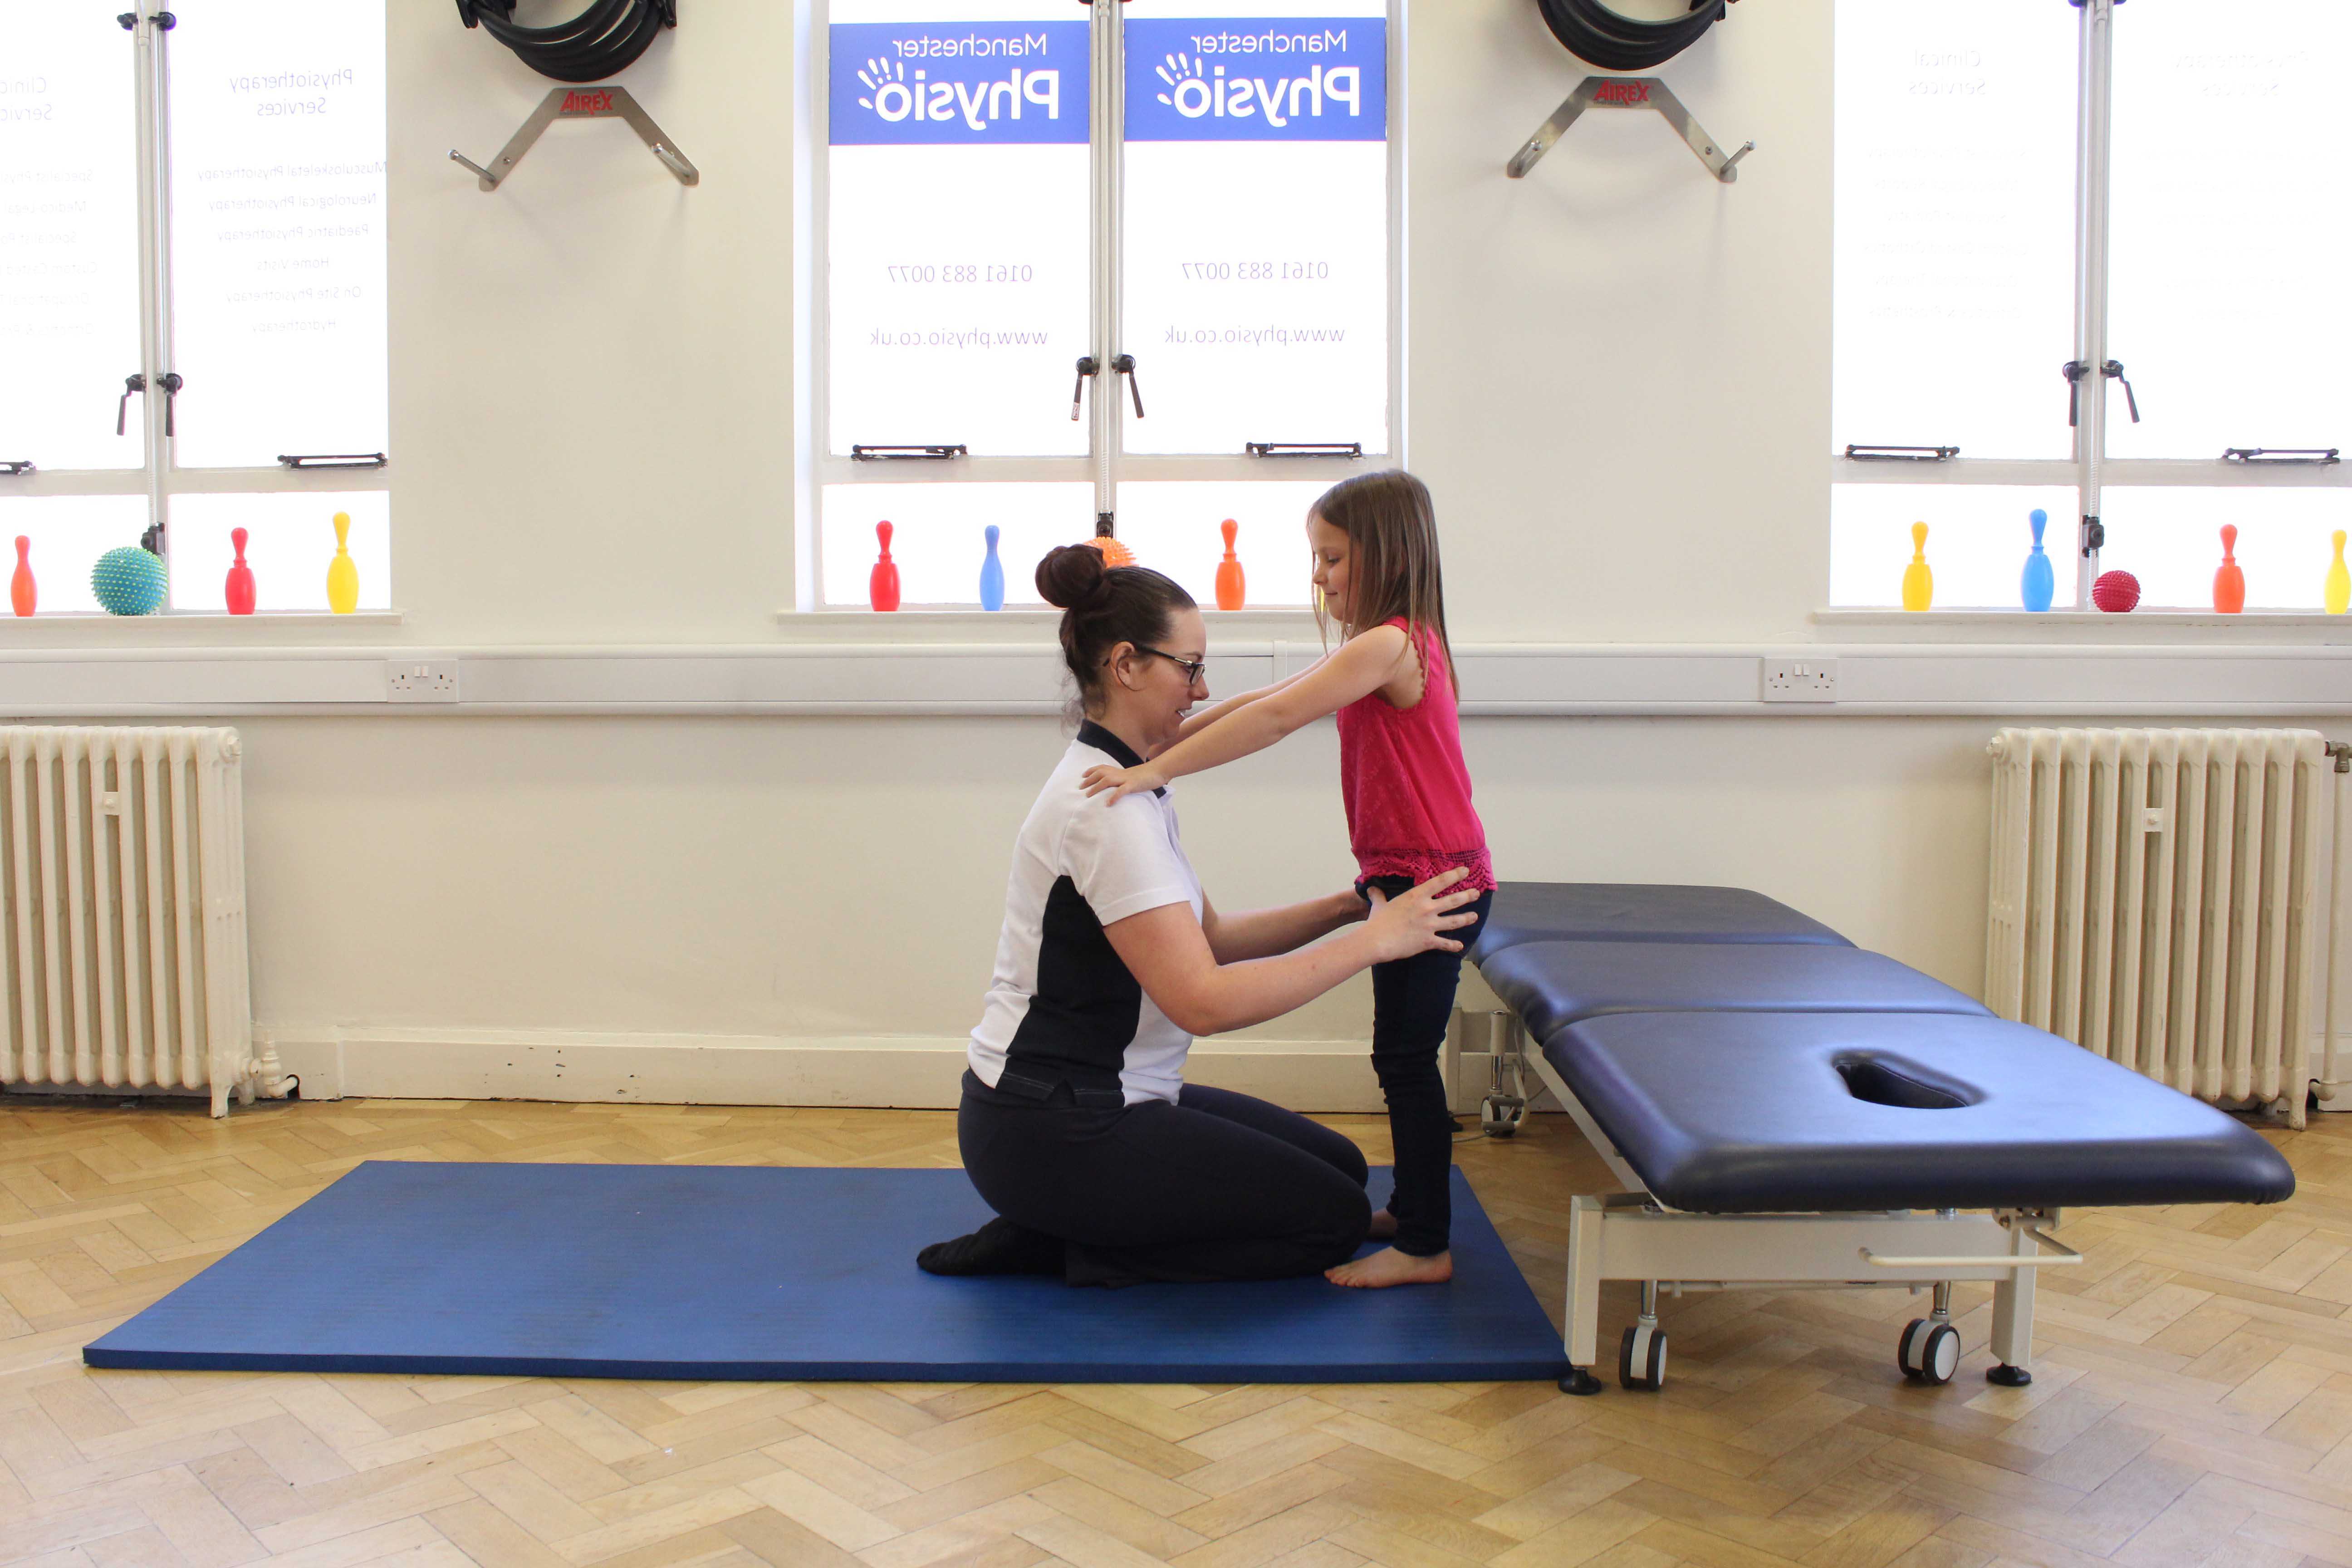 Mobility exercises encouraging development of functional abilities overseen by paediatric physiotherapist